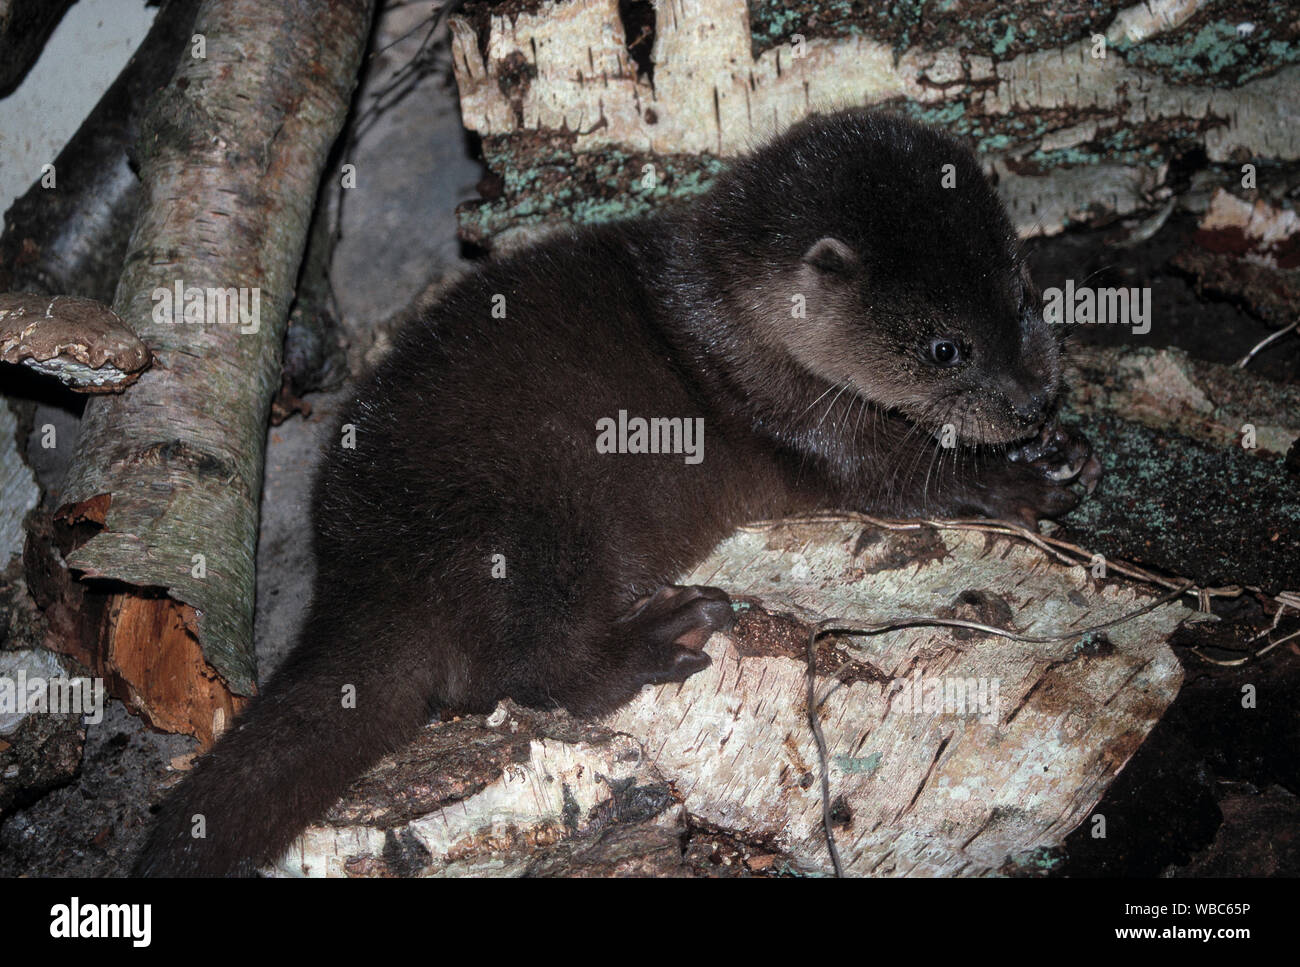 EUROPEAN OTTER ( Lutra lutra). Ten-week-old cub, feeding on solid food item. Weaned. Rescued, storm blown orphan. The Inner Hebrides, West coast Scotland.  Later released on site of finding. Stock Photo